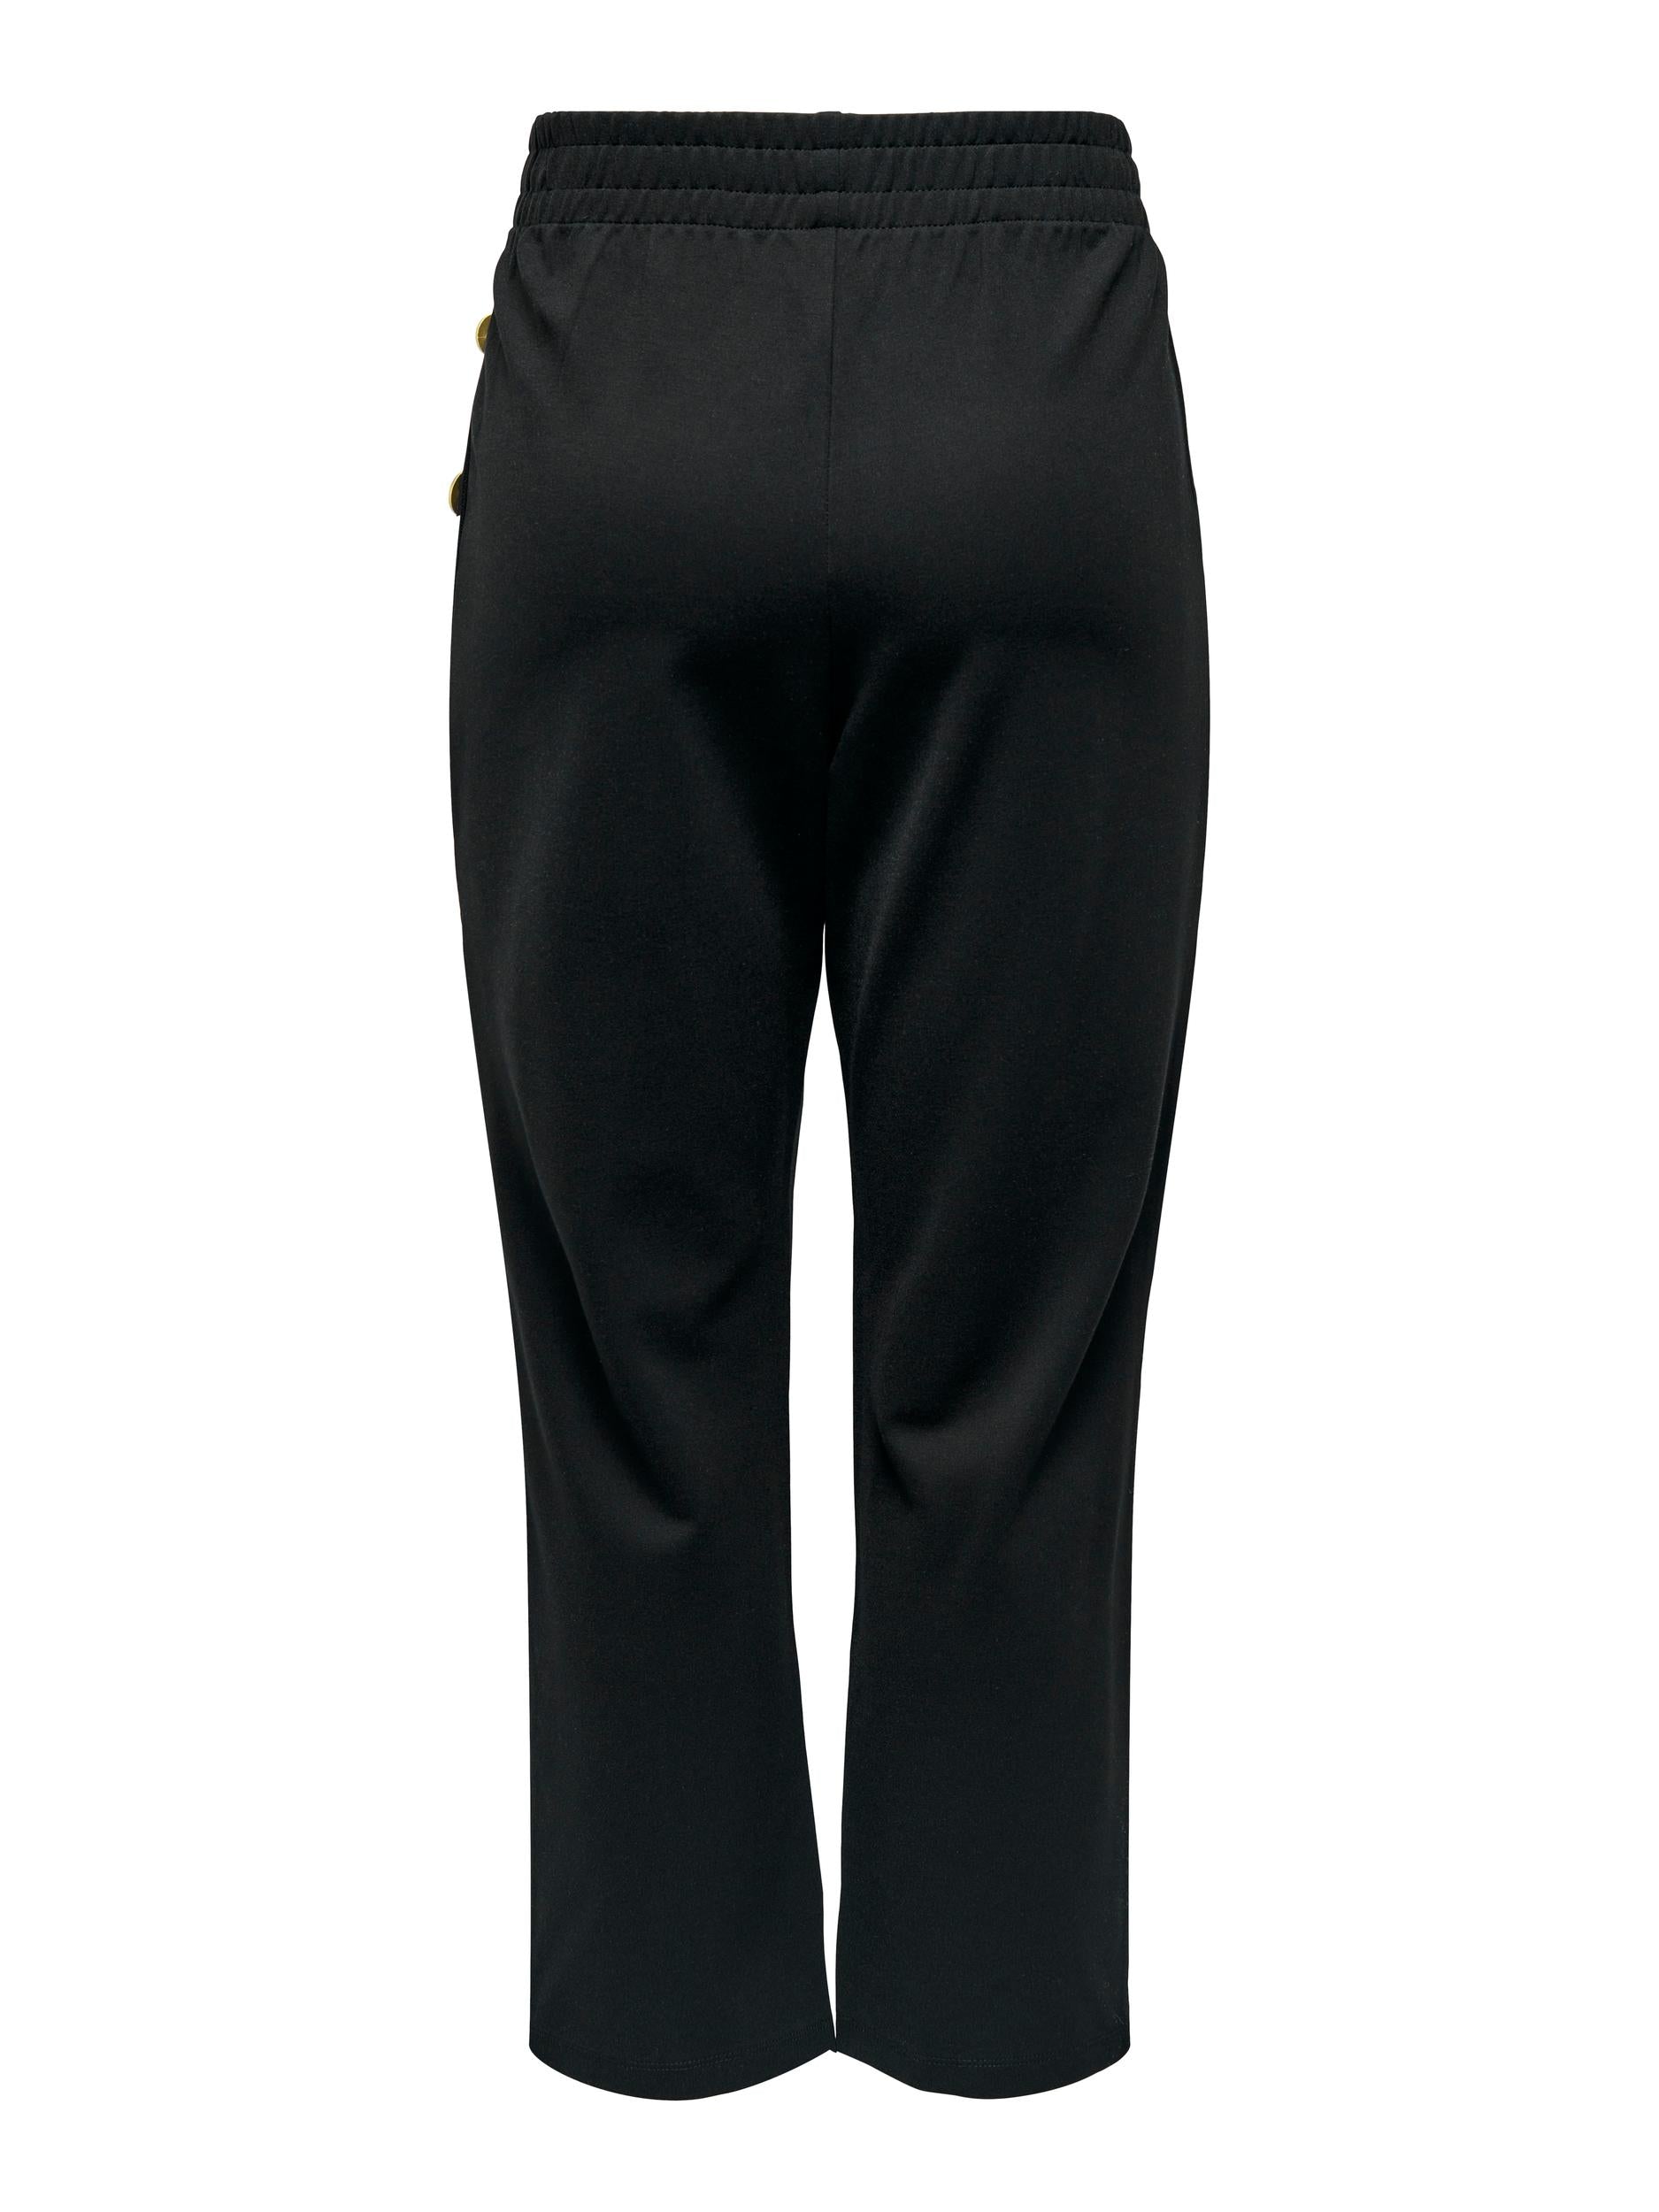 Ladies Cally Button Ancle Pant-Black-Back View